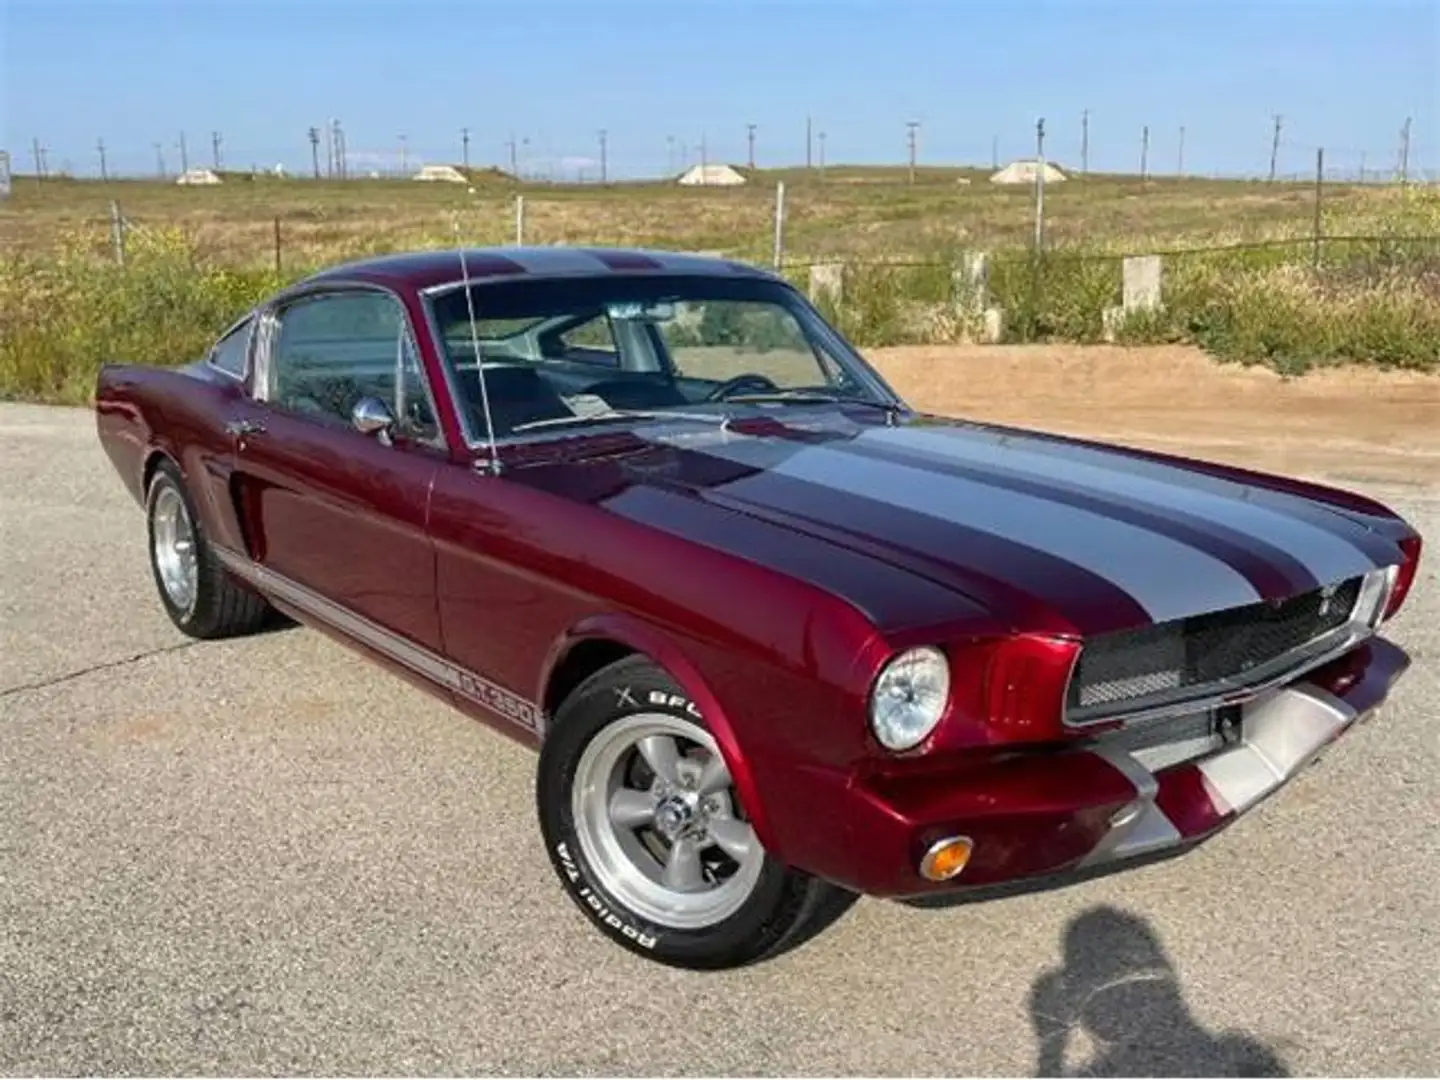 Ford Mustang FASTBACK 1965 - 1